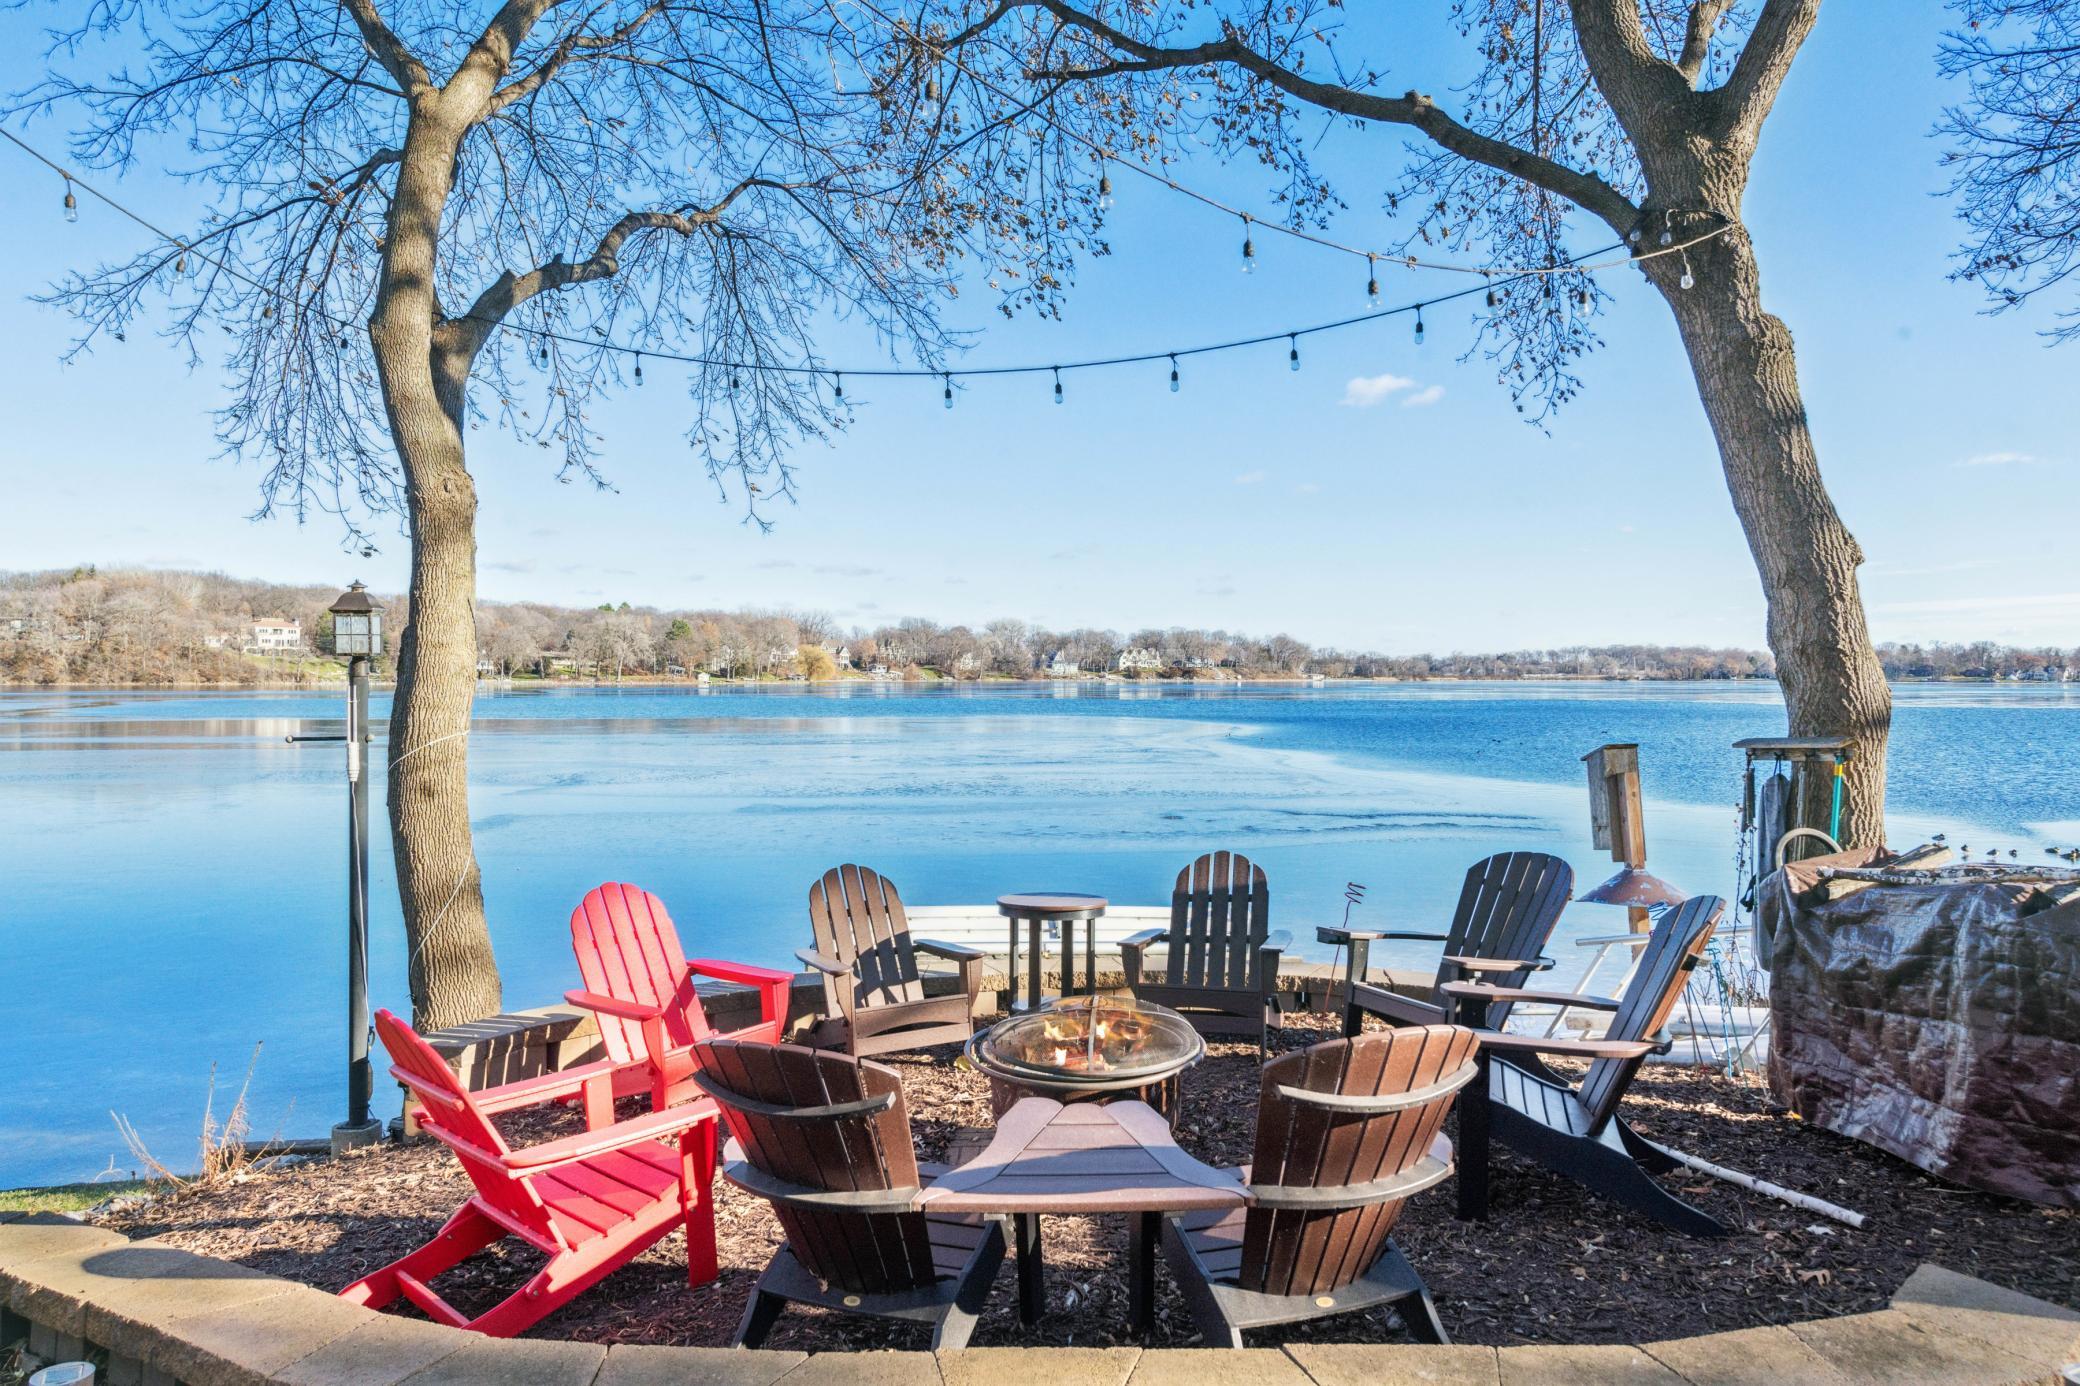 Ready for some fun? Beautifully remodeled house and spectacular views of Lake Minnetonka!